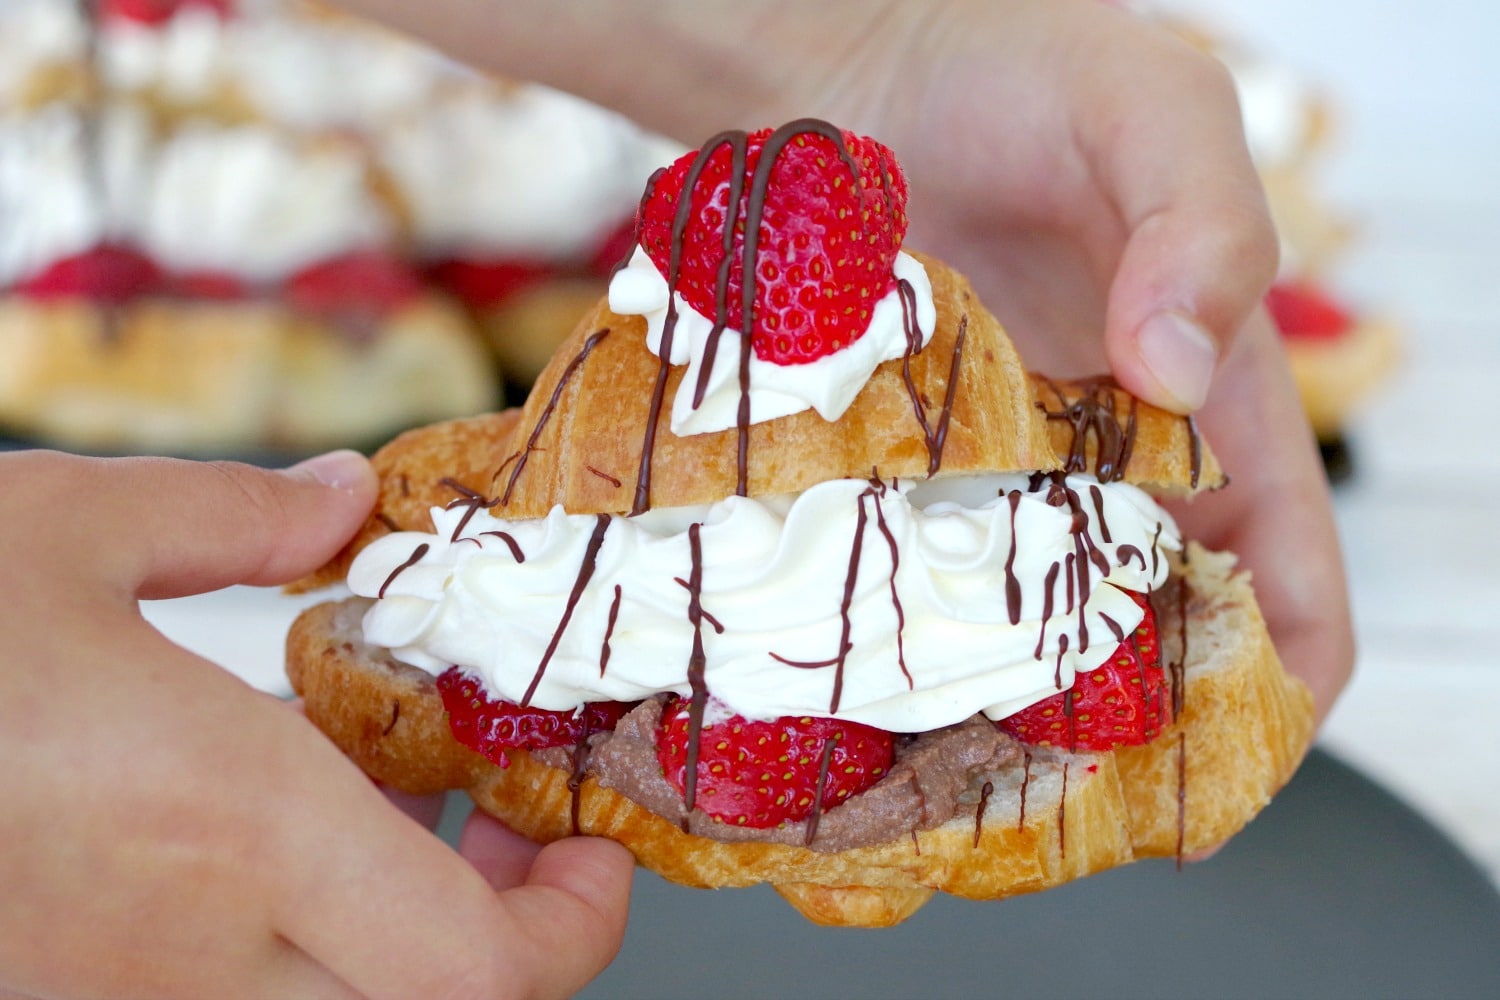 Strawberry Eclair being held in child's hands